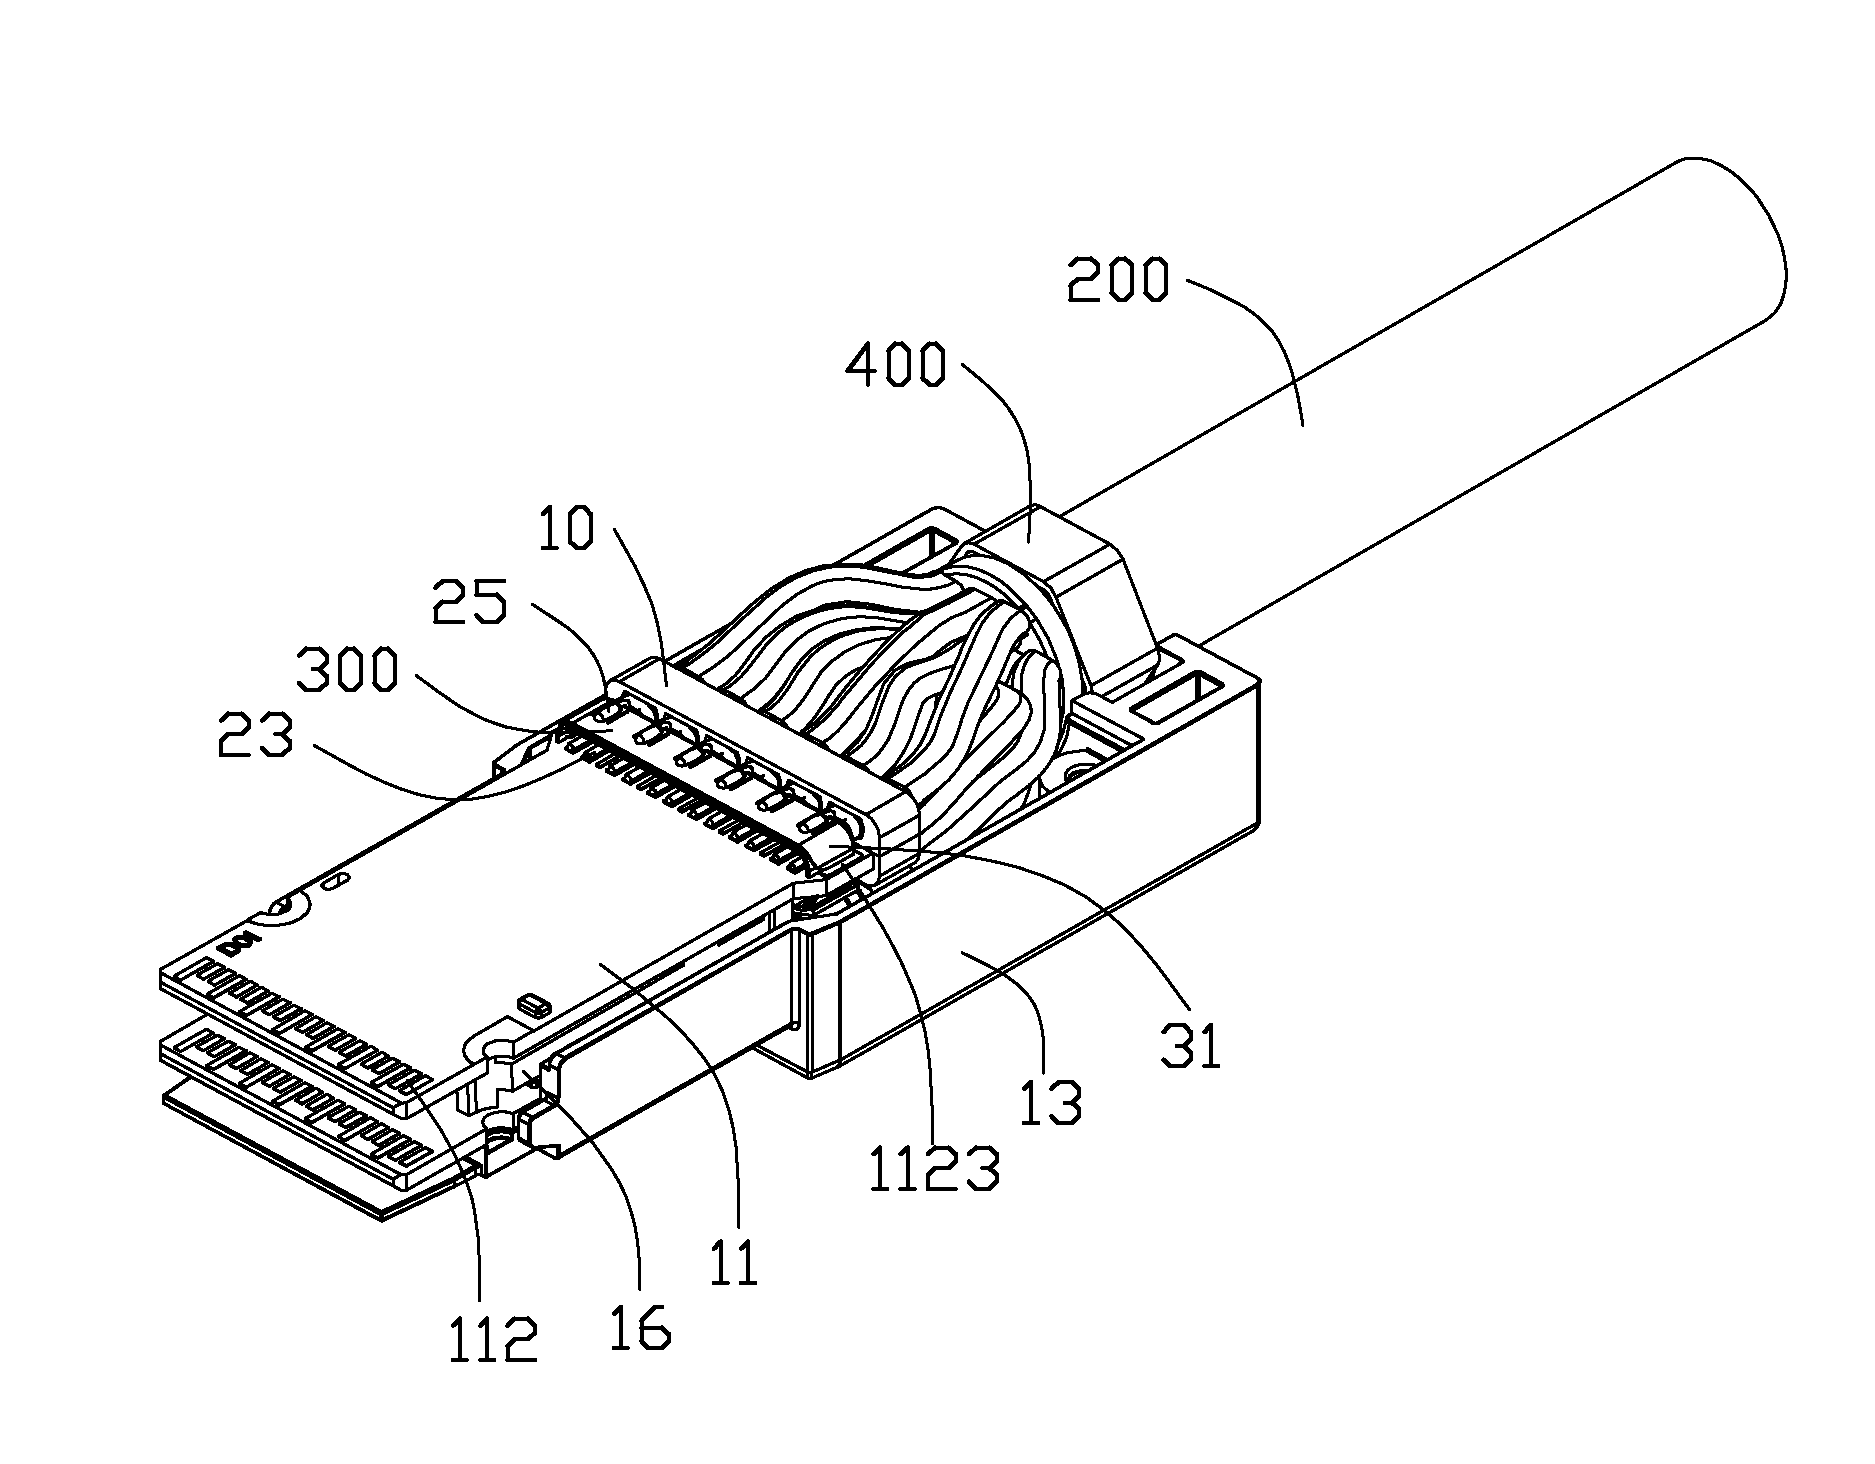 Cable connector assembly having an adapter plate for grounding